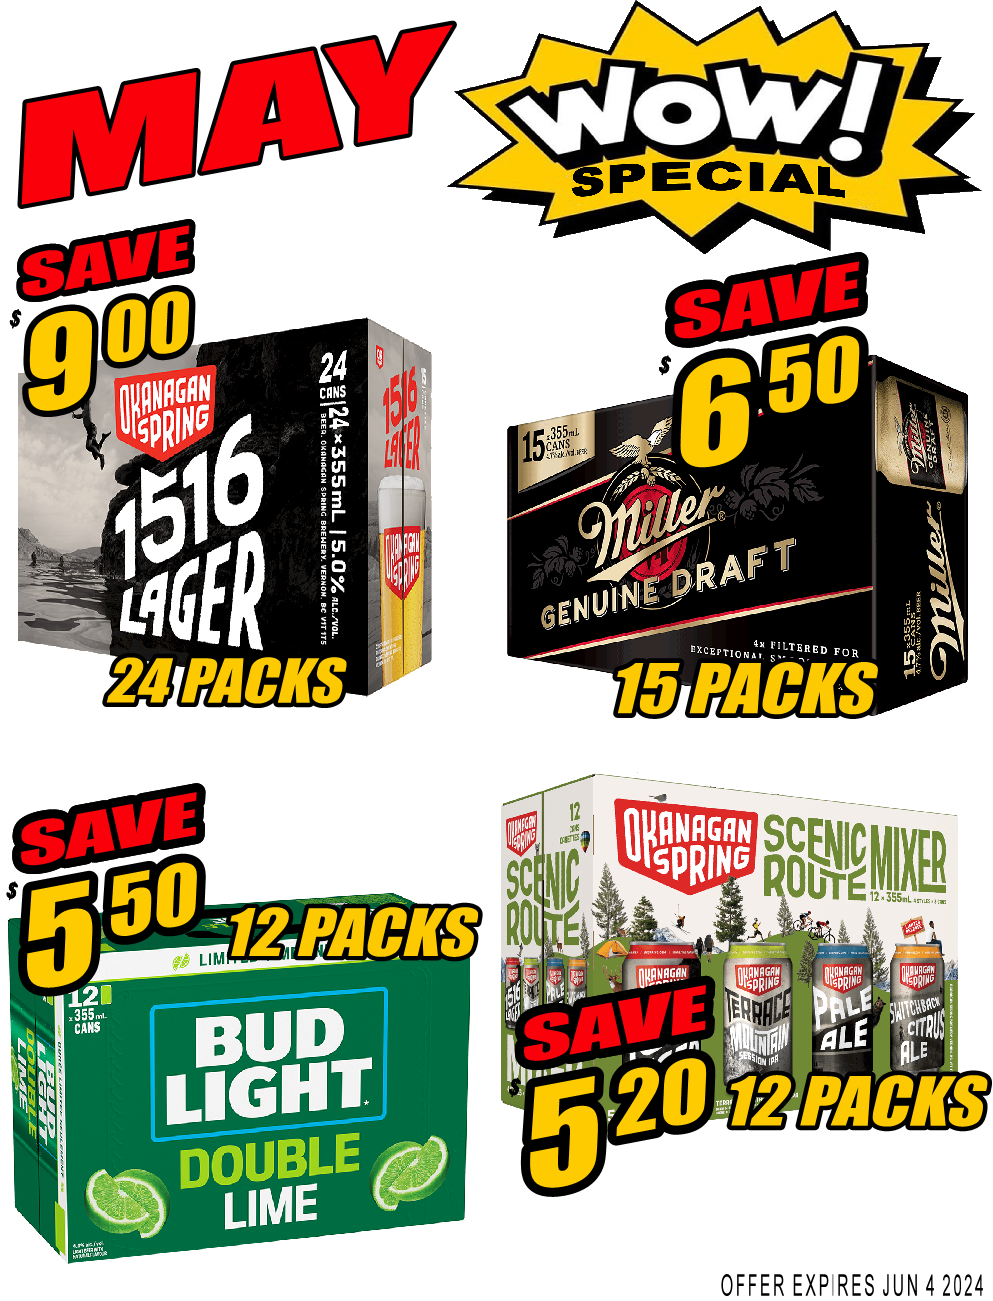 May WOW Sales!! OK Scenic Route-12AR-Save $5.20/ OK 1516 Lager-24AR-Save $9.00/ Bud Light Double Lime-12AR-Save $5.50/ MGD-12PB-Save $6.50   WOW!!!